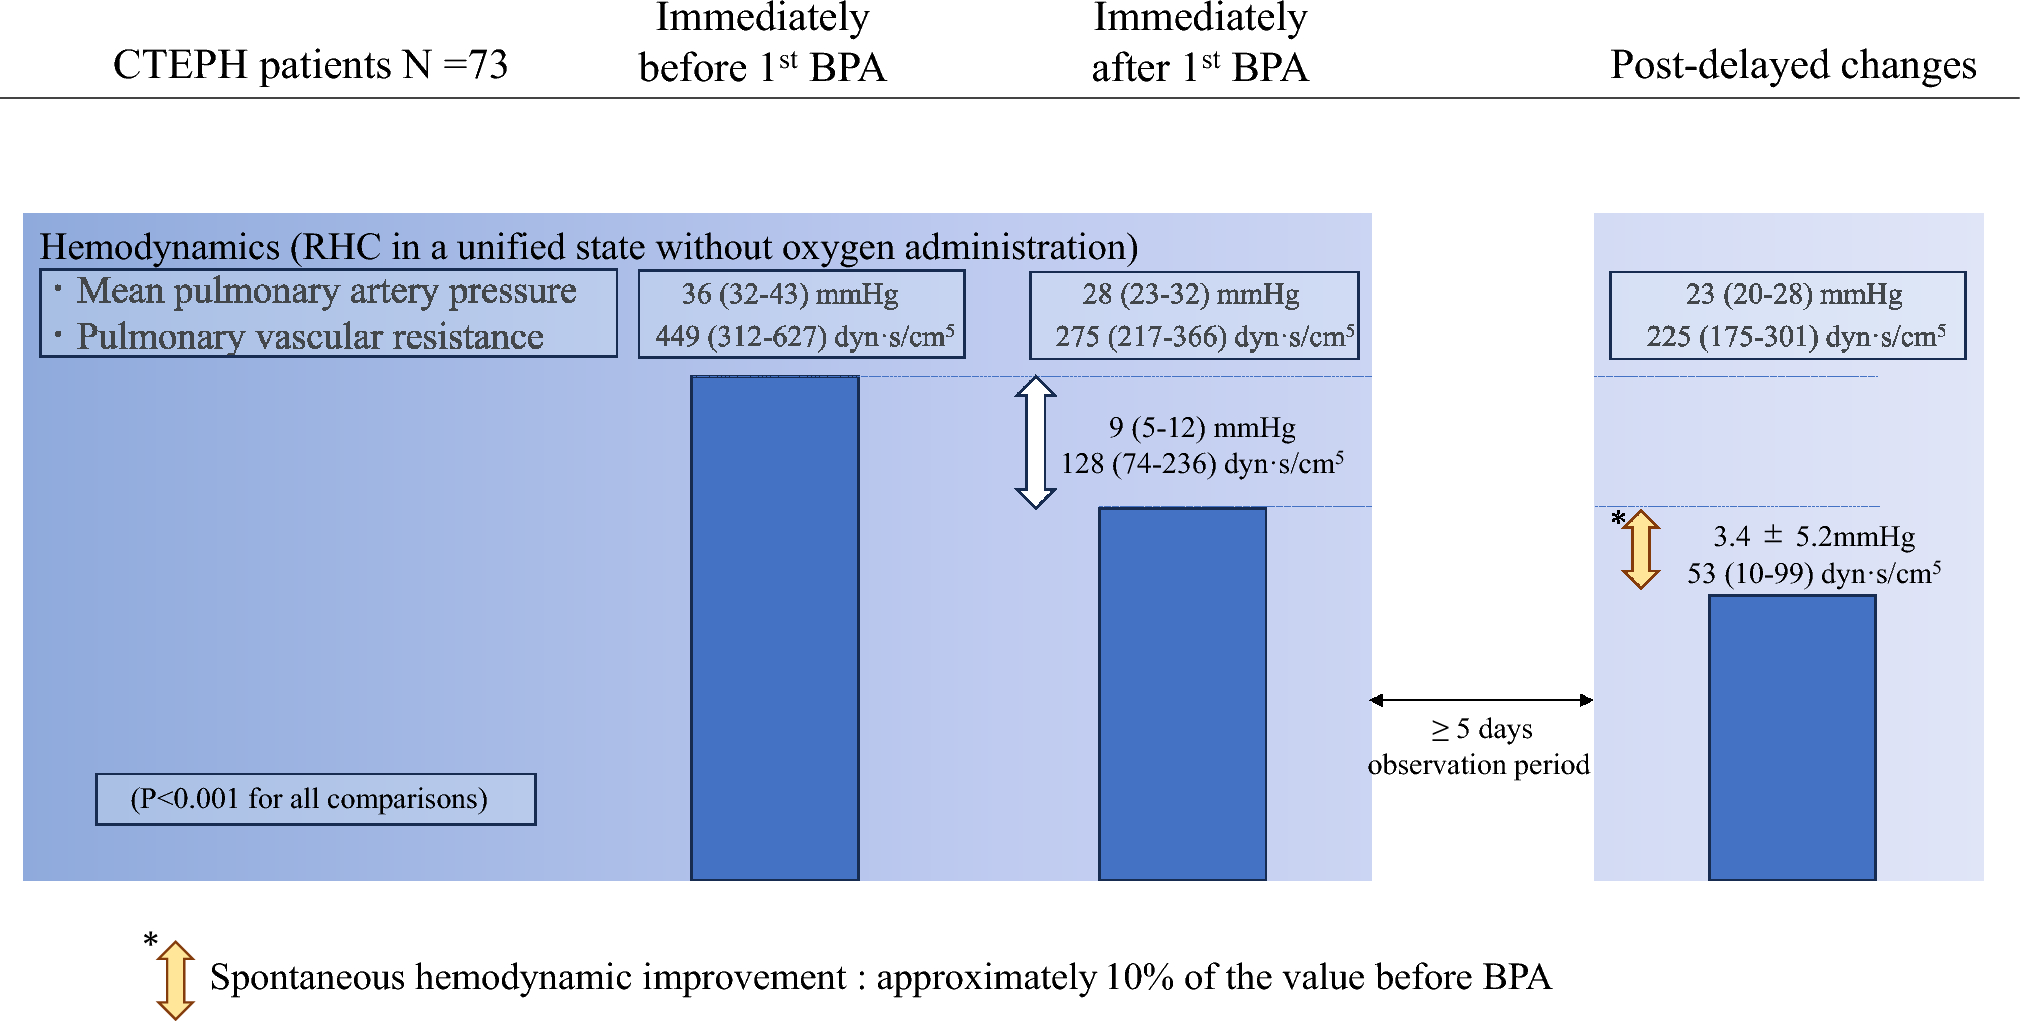 Spontaneous hemodynamic improvement after balloon pulmonary angioplasty in patients with chronic thromboembolic pulmonary hypertension is observed within a short term after balloon pulmonary angioplasty